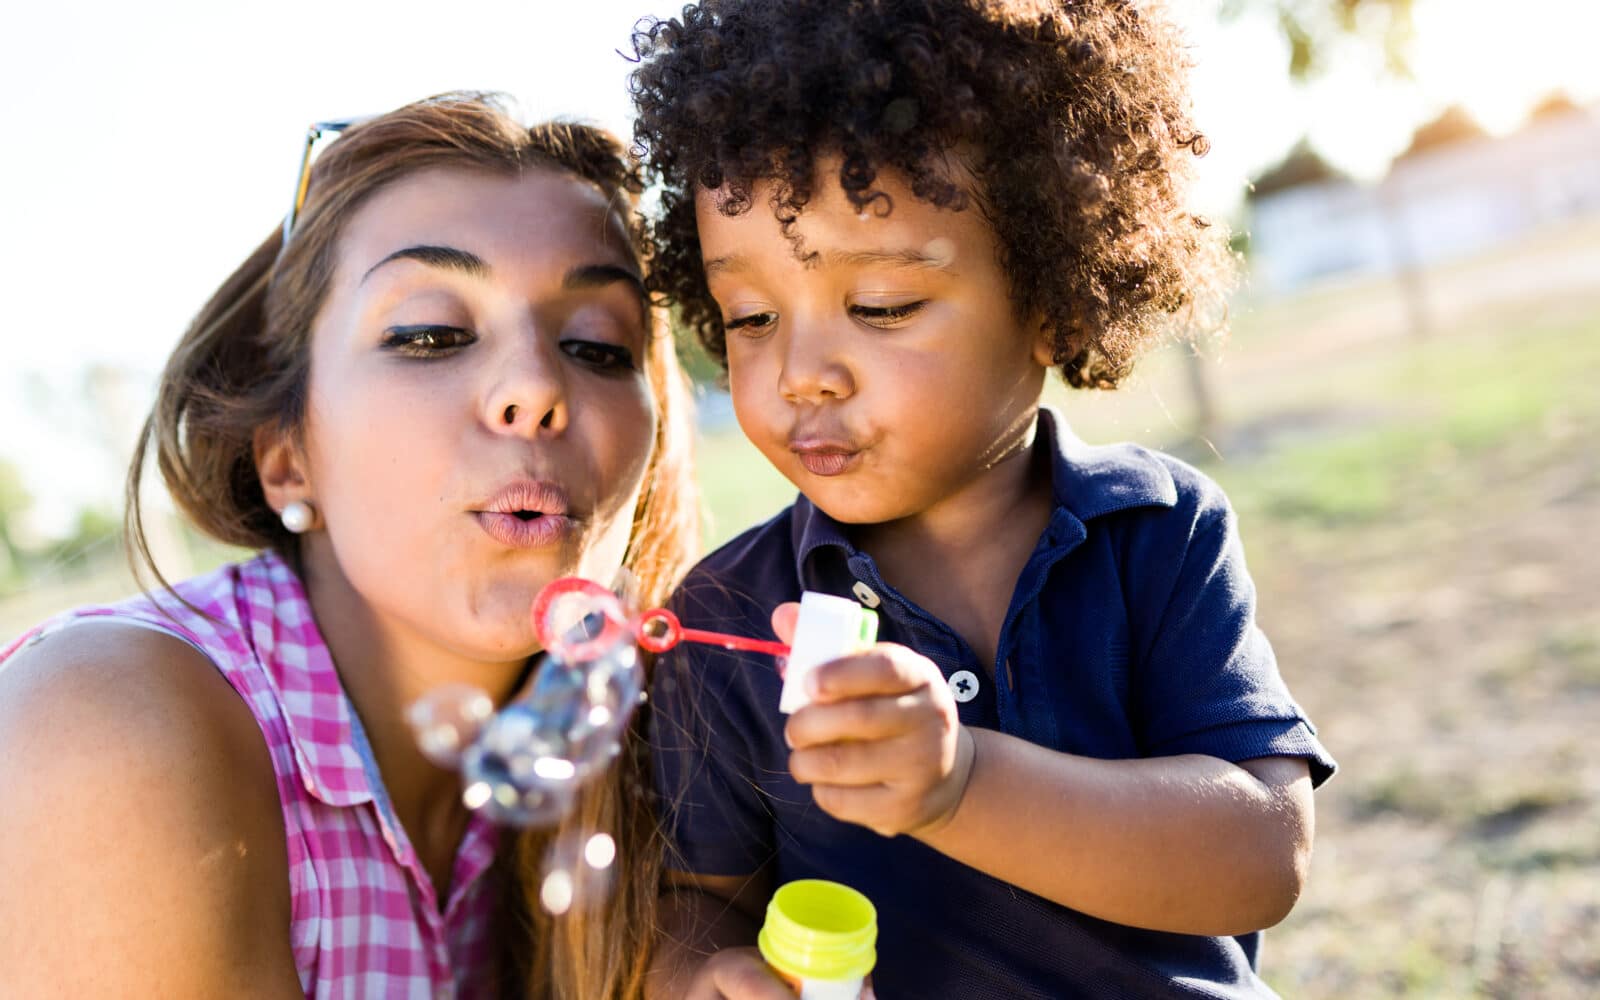 Portrait of beautiful young mother with her son blowing bubbles in the park.